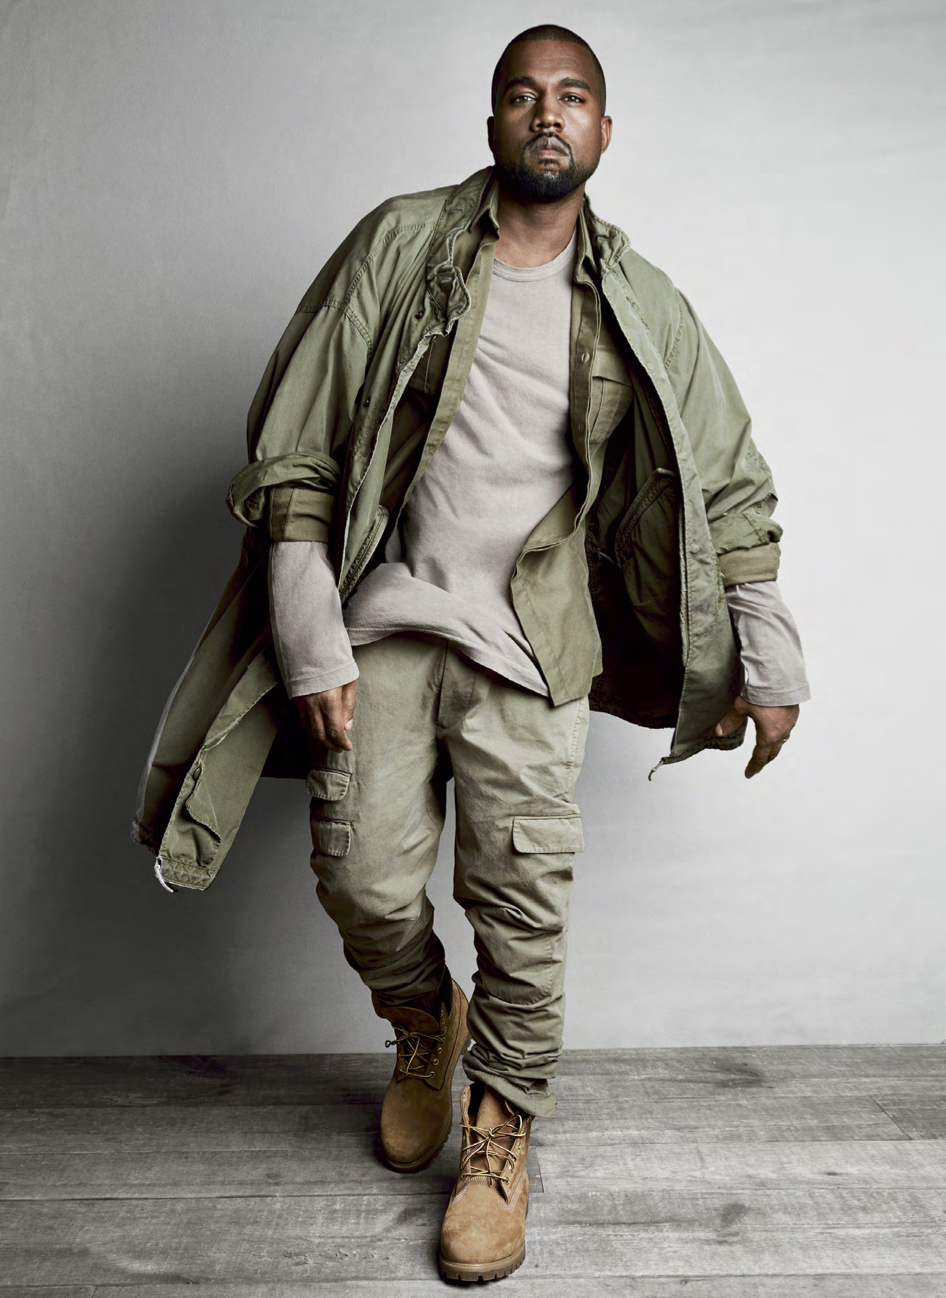 Jim Moore | Actor Attitude | Kanye West by Patrick Demarchelier, 2014 | 20